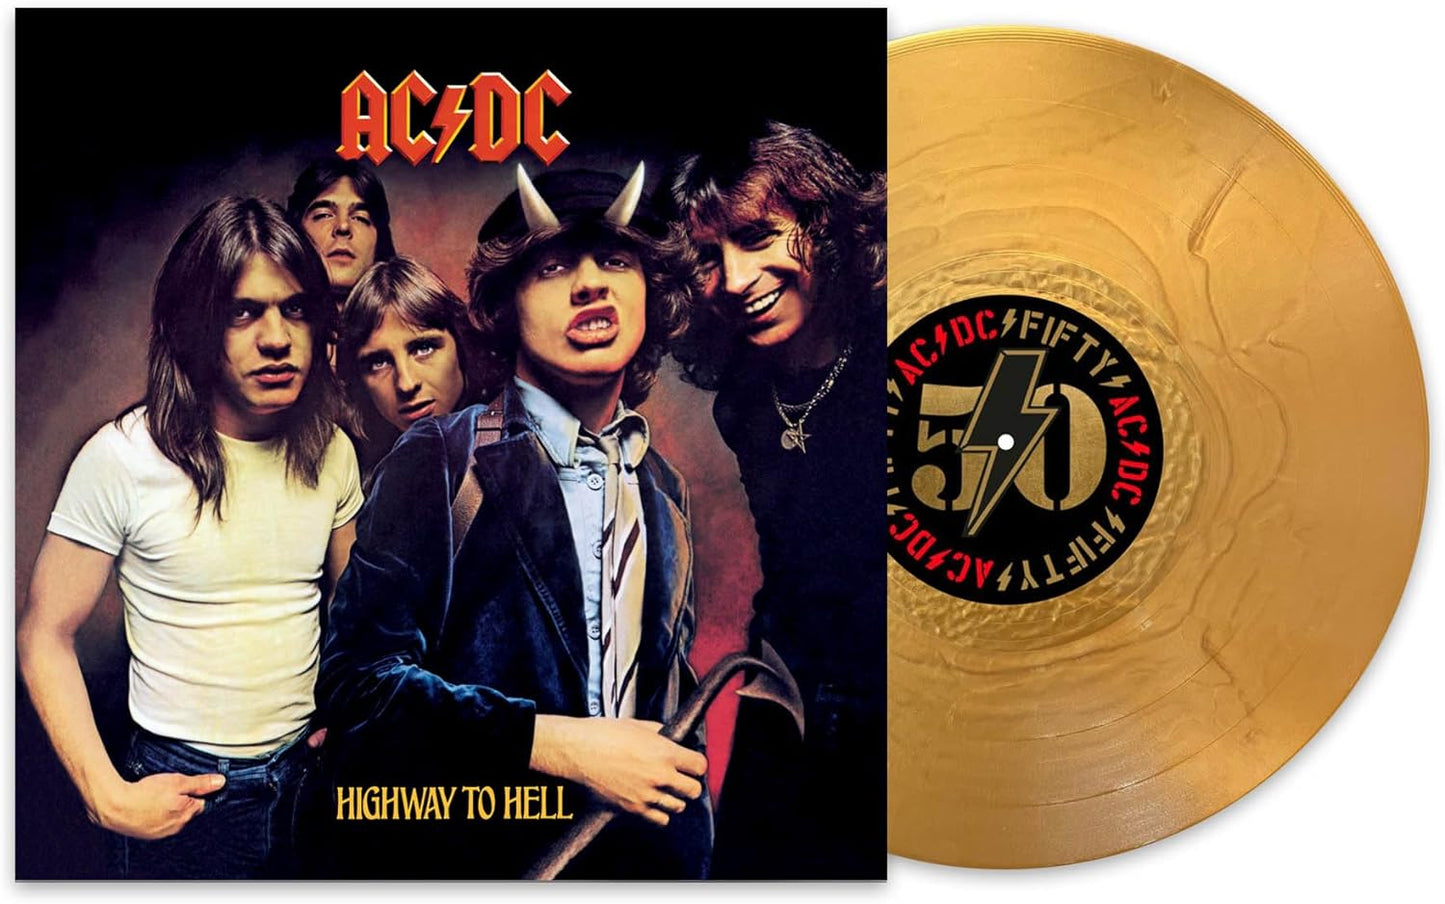 Highway To Hell (50th Anniversary Gold Colour Vinyl) - ACDC